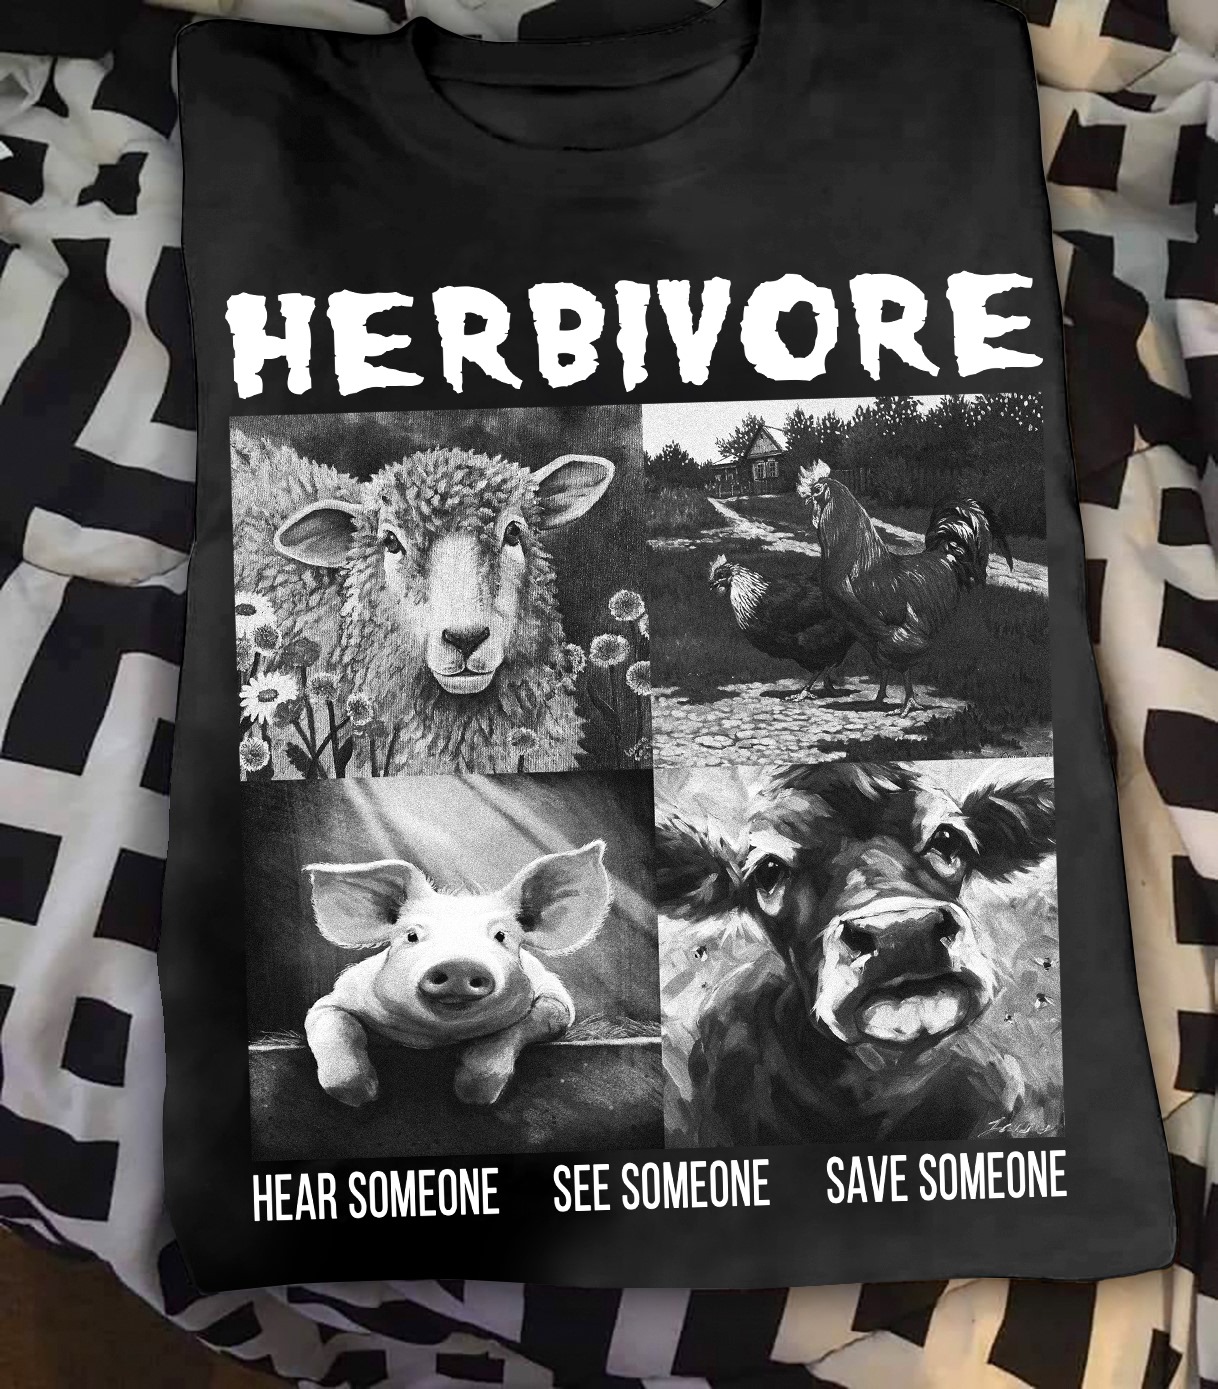 Herbivore hear someone, see someone, see someone - Sheep, cow, pig and chicken